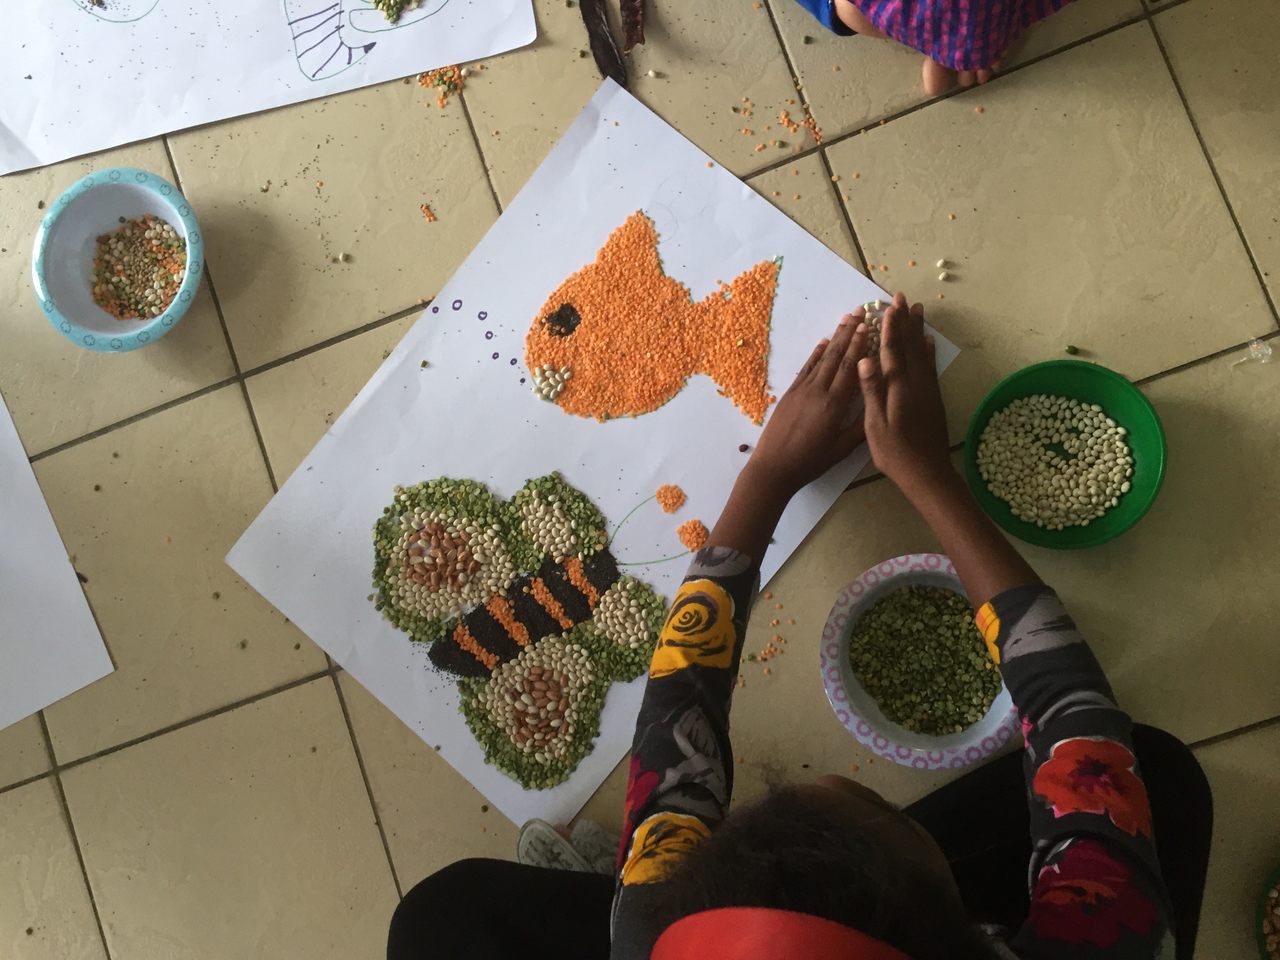 Khan also holds workshops for children to interact, play with, and learn about seeds. 